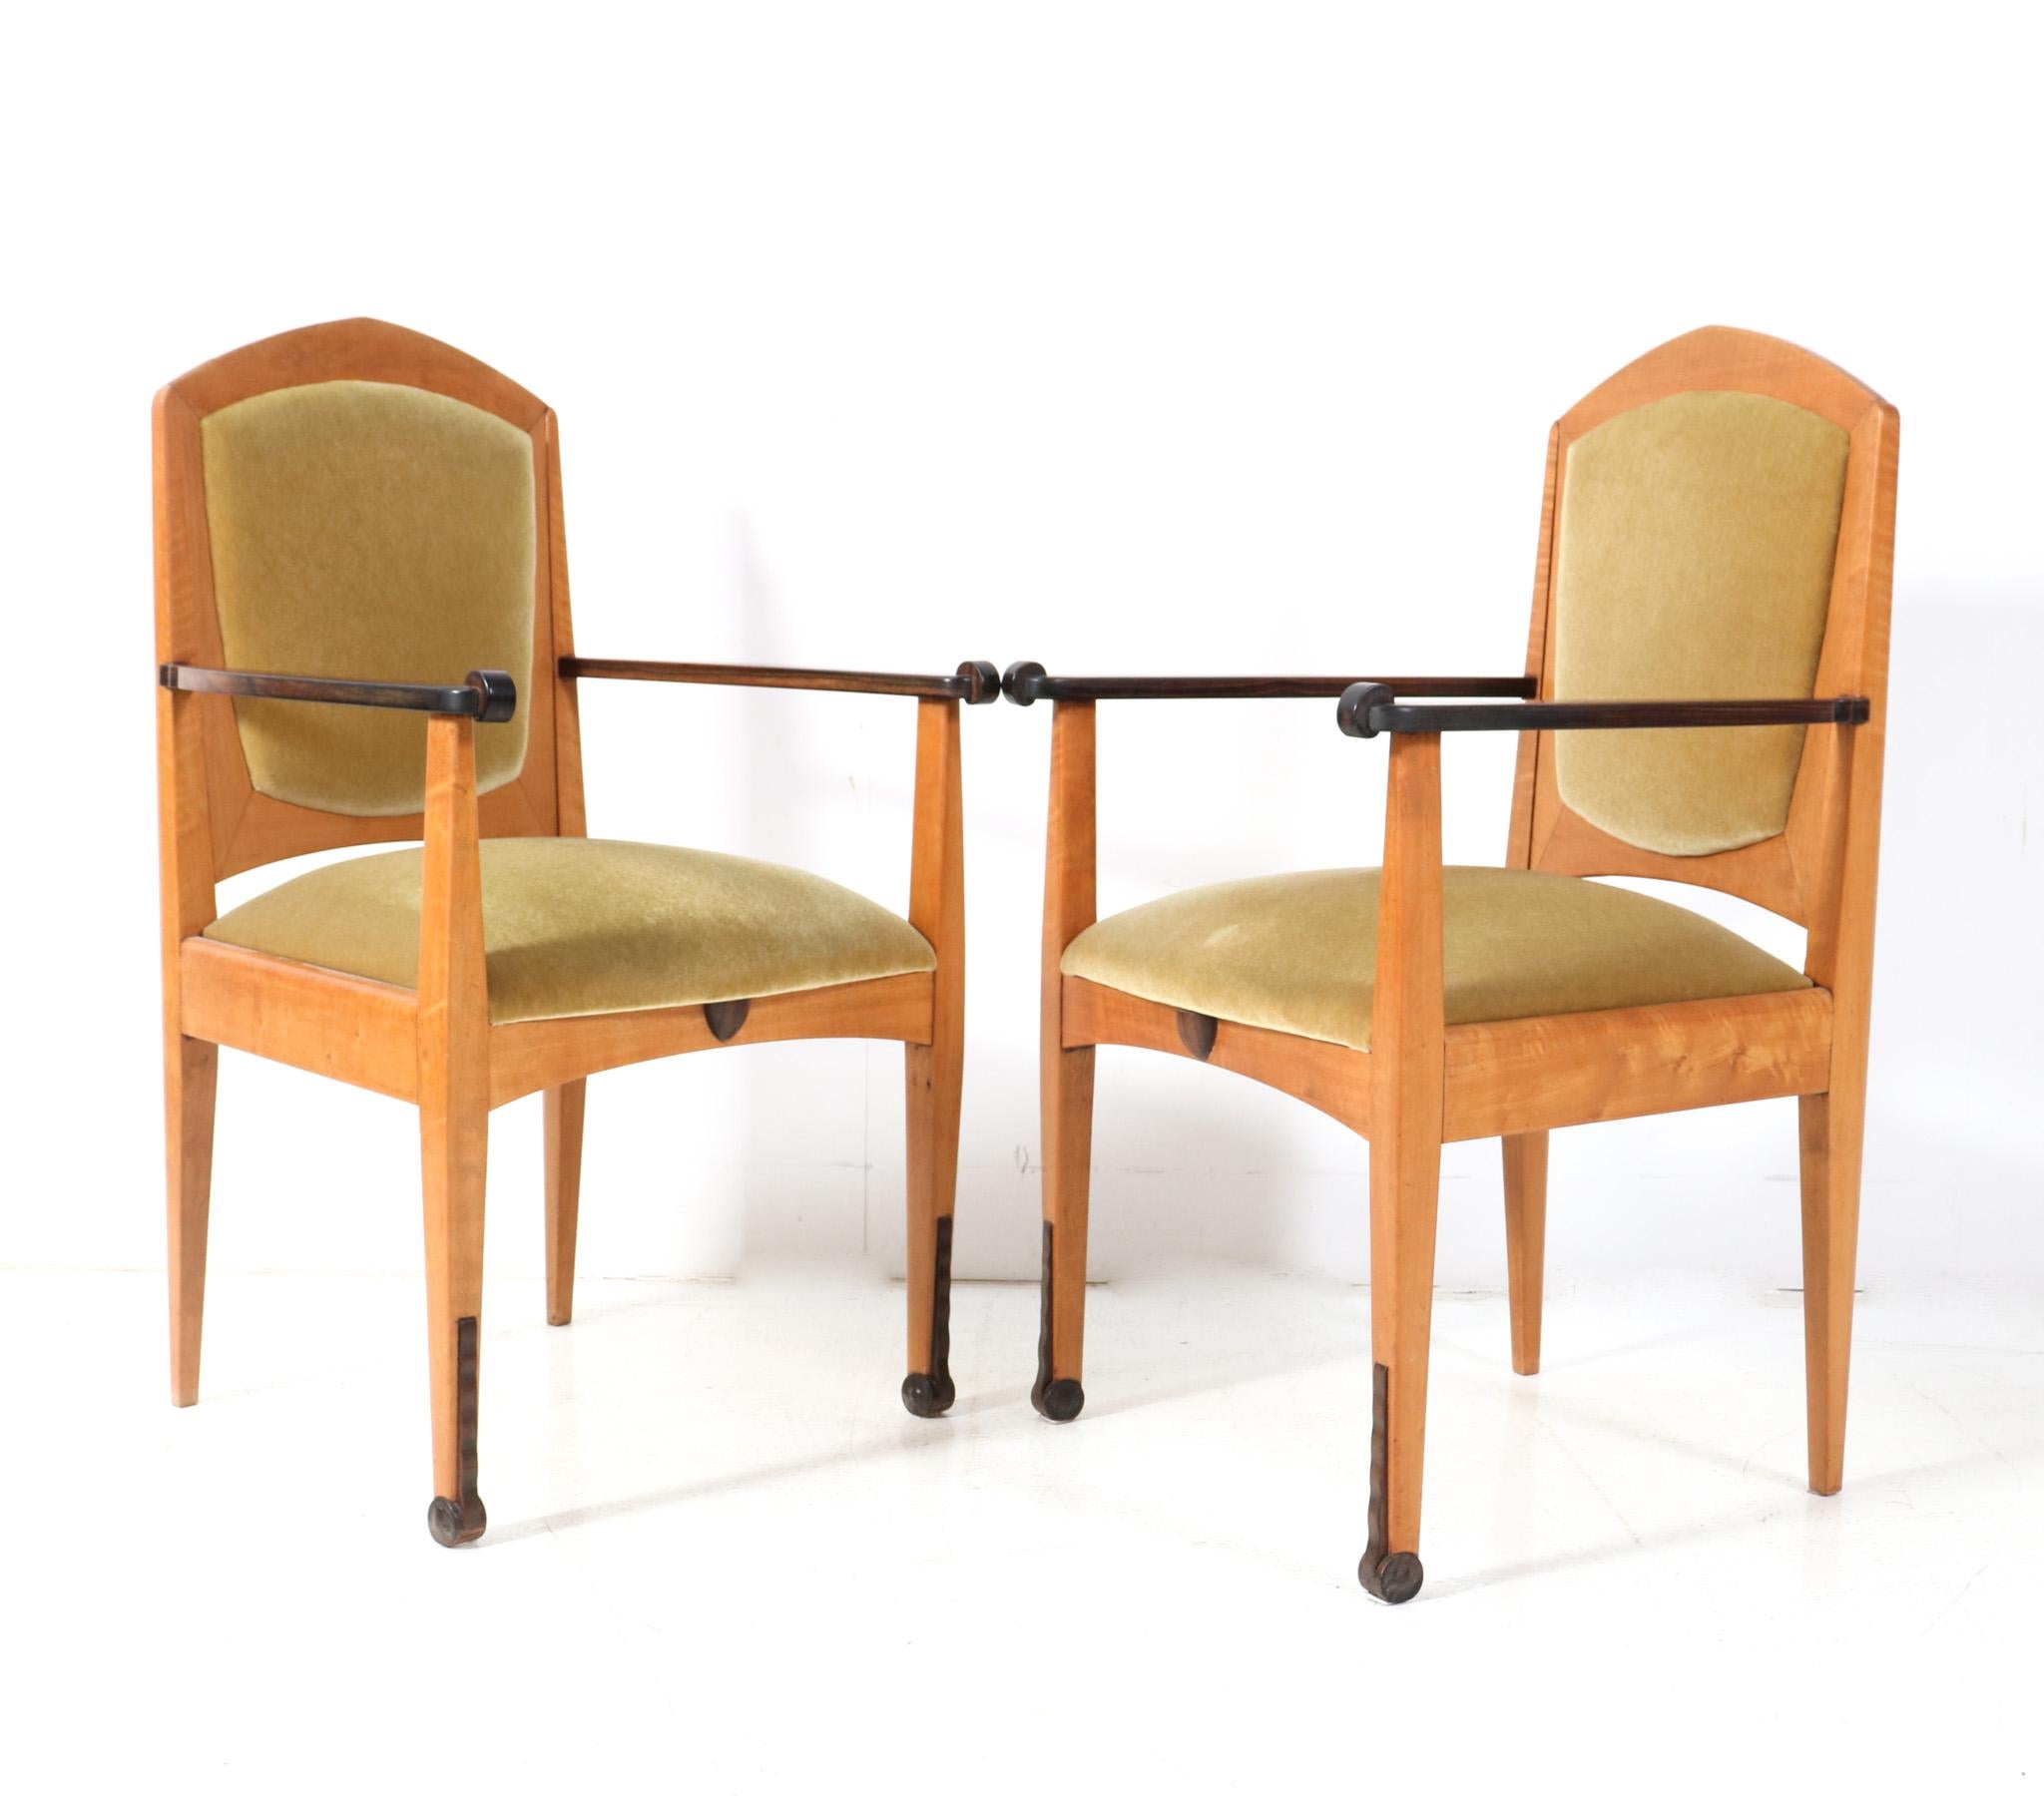 Dutch Set of Six Art Deco Amsterdamse School Dining Room Chairs by J.J. Zijfers, 1920s For Sale